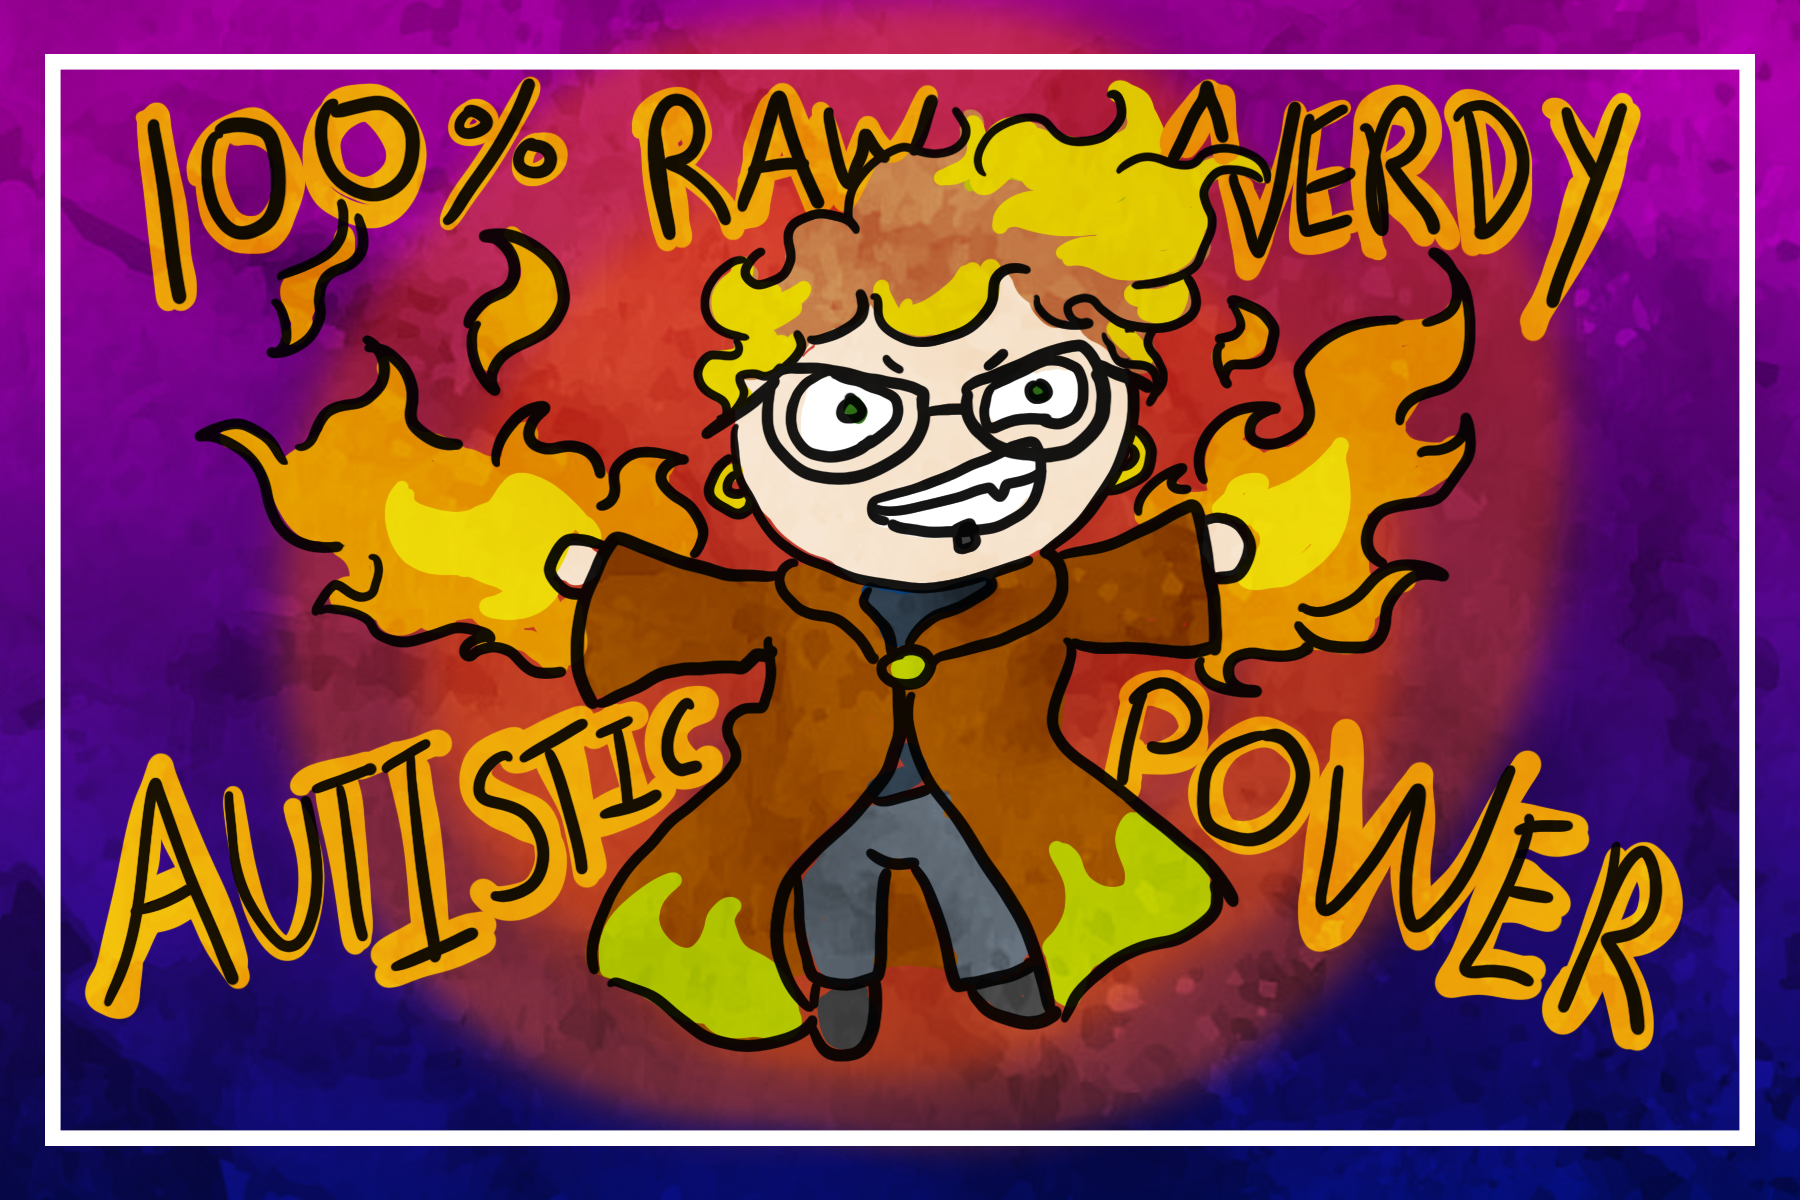 author's DnD character with a sorcerer's robe and fire coming out of their hands, 100% raw nerdy autistic power.